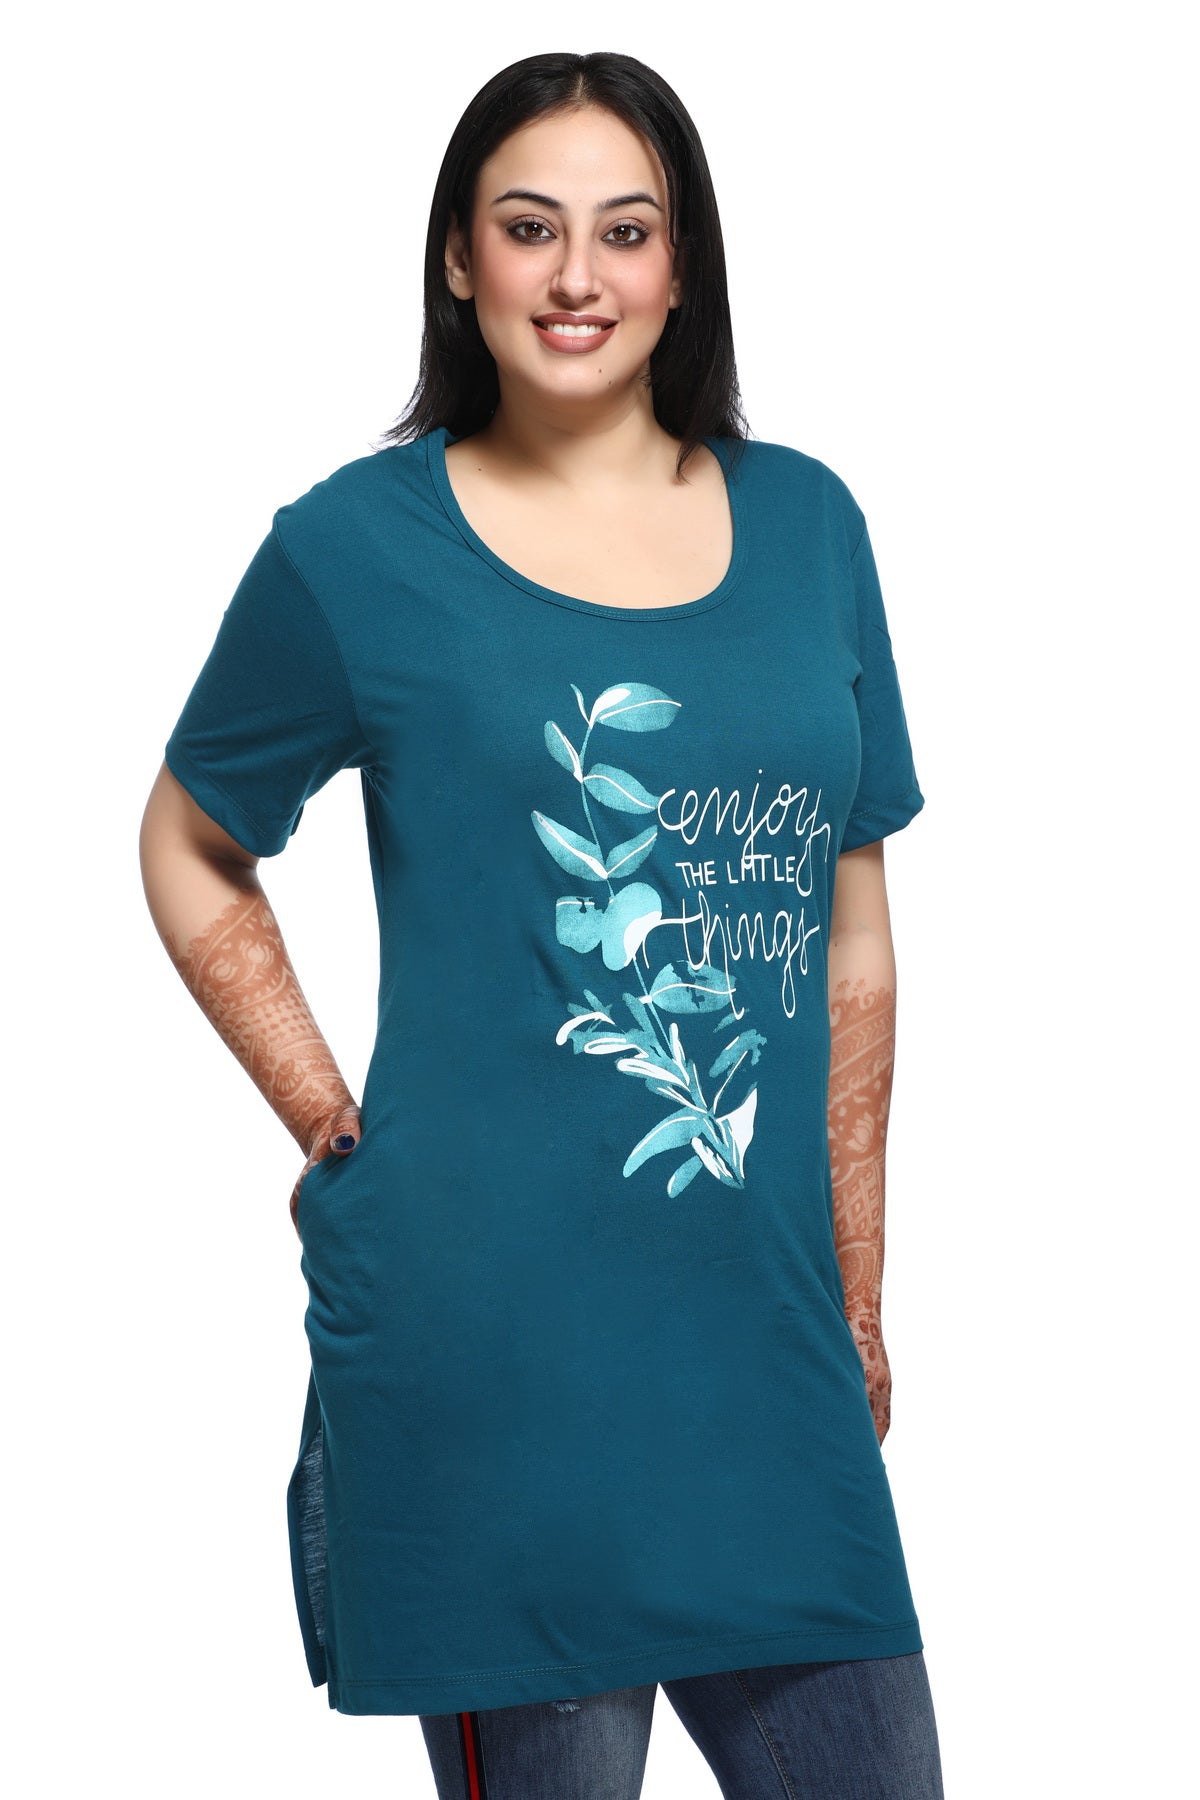 Plus Size Long T-shirts For Women - Half Sleeve - Pack of 2 (Orange & Teal)